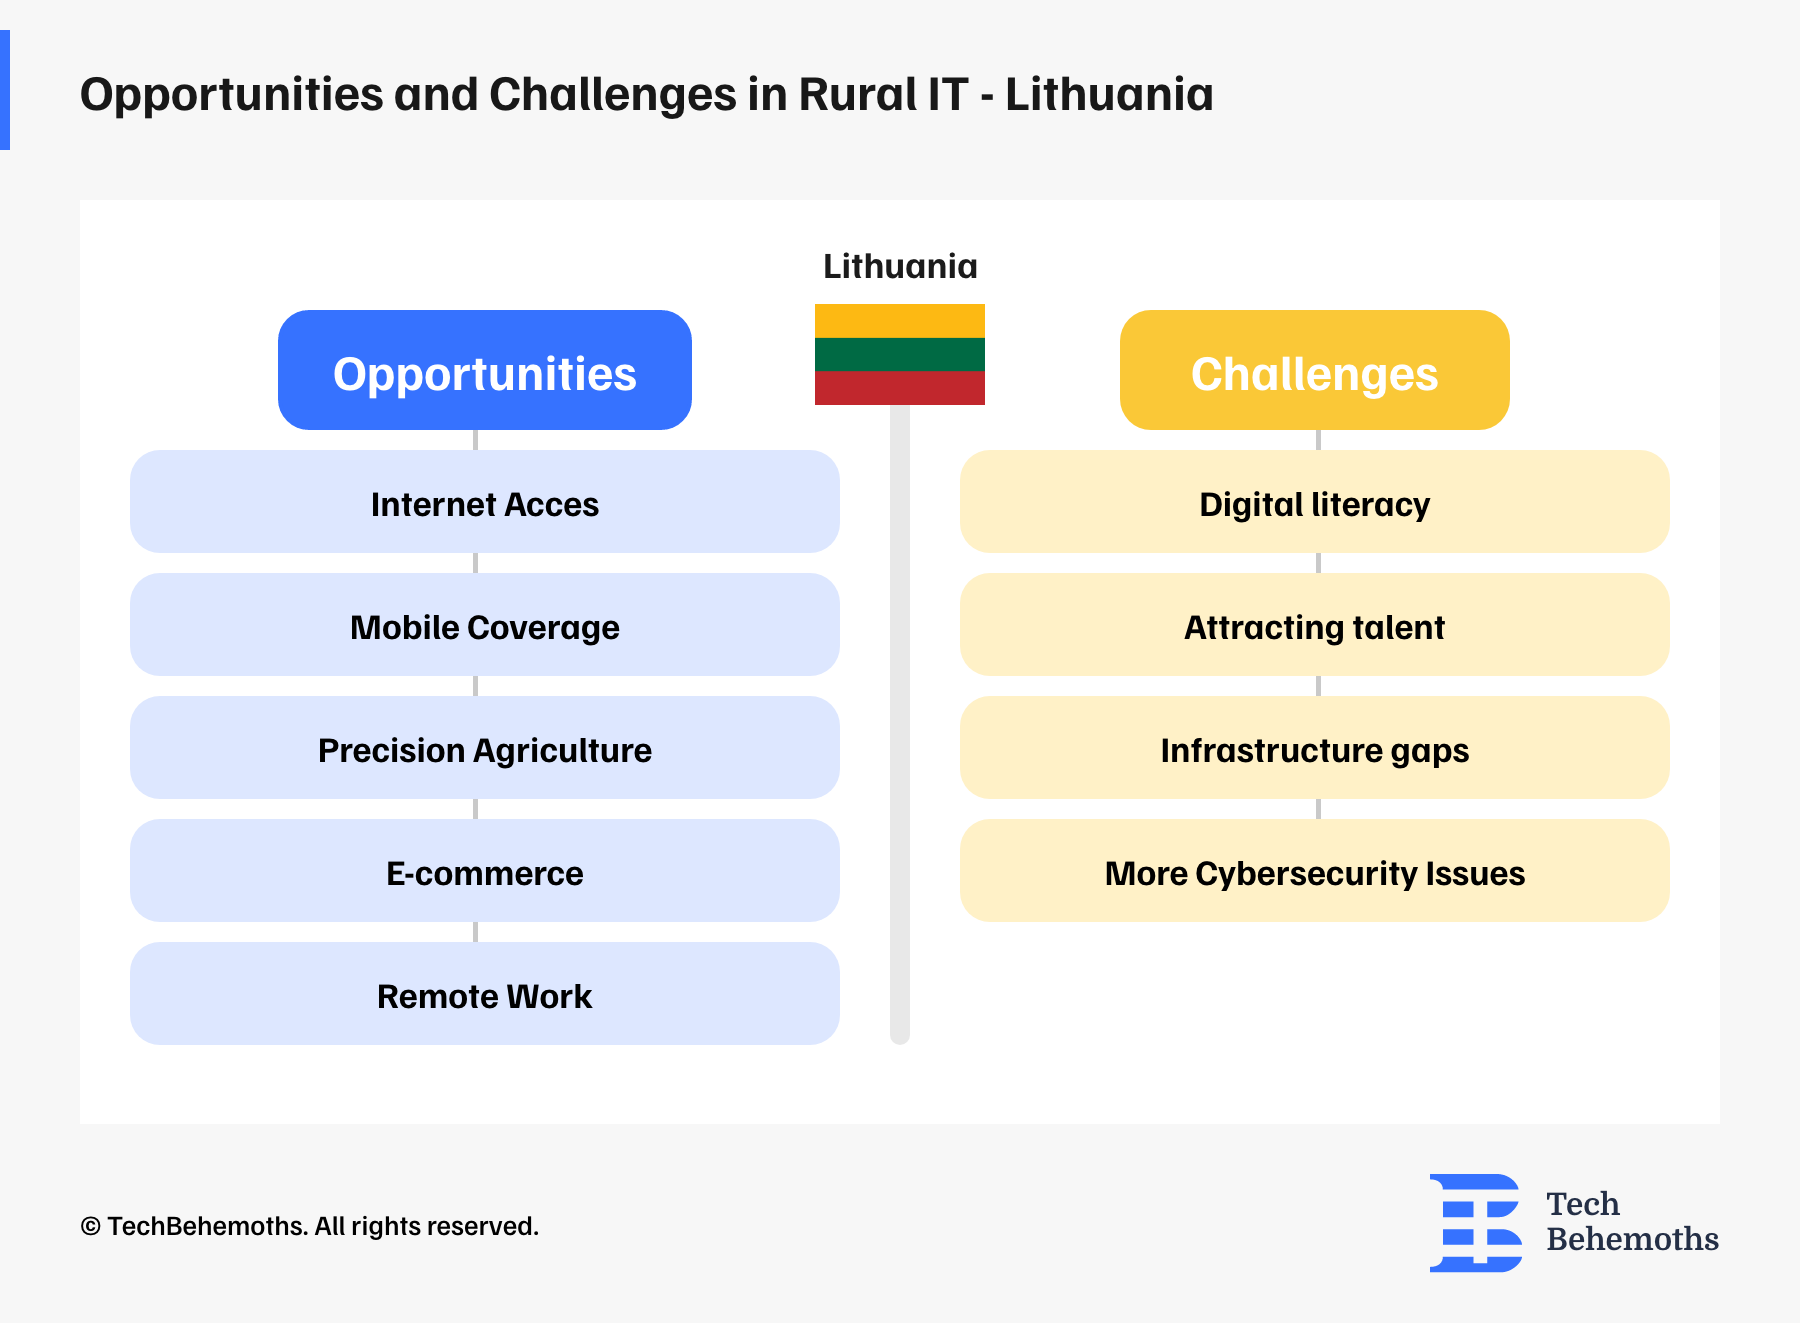 opportunities vs challenges in Rural IT Lithuania